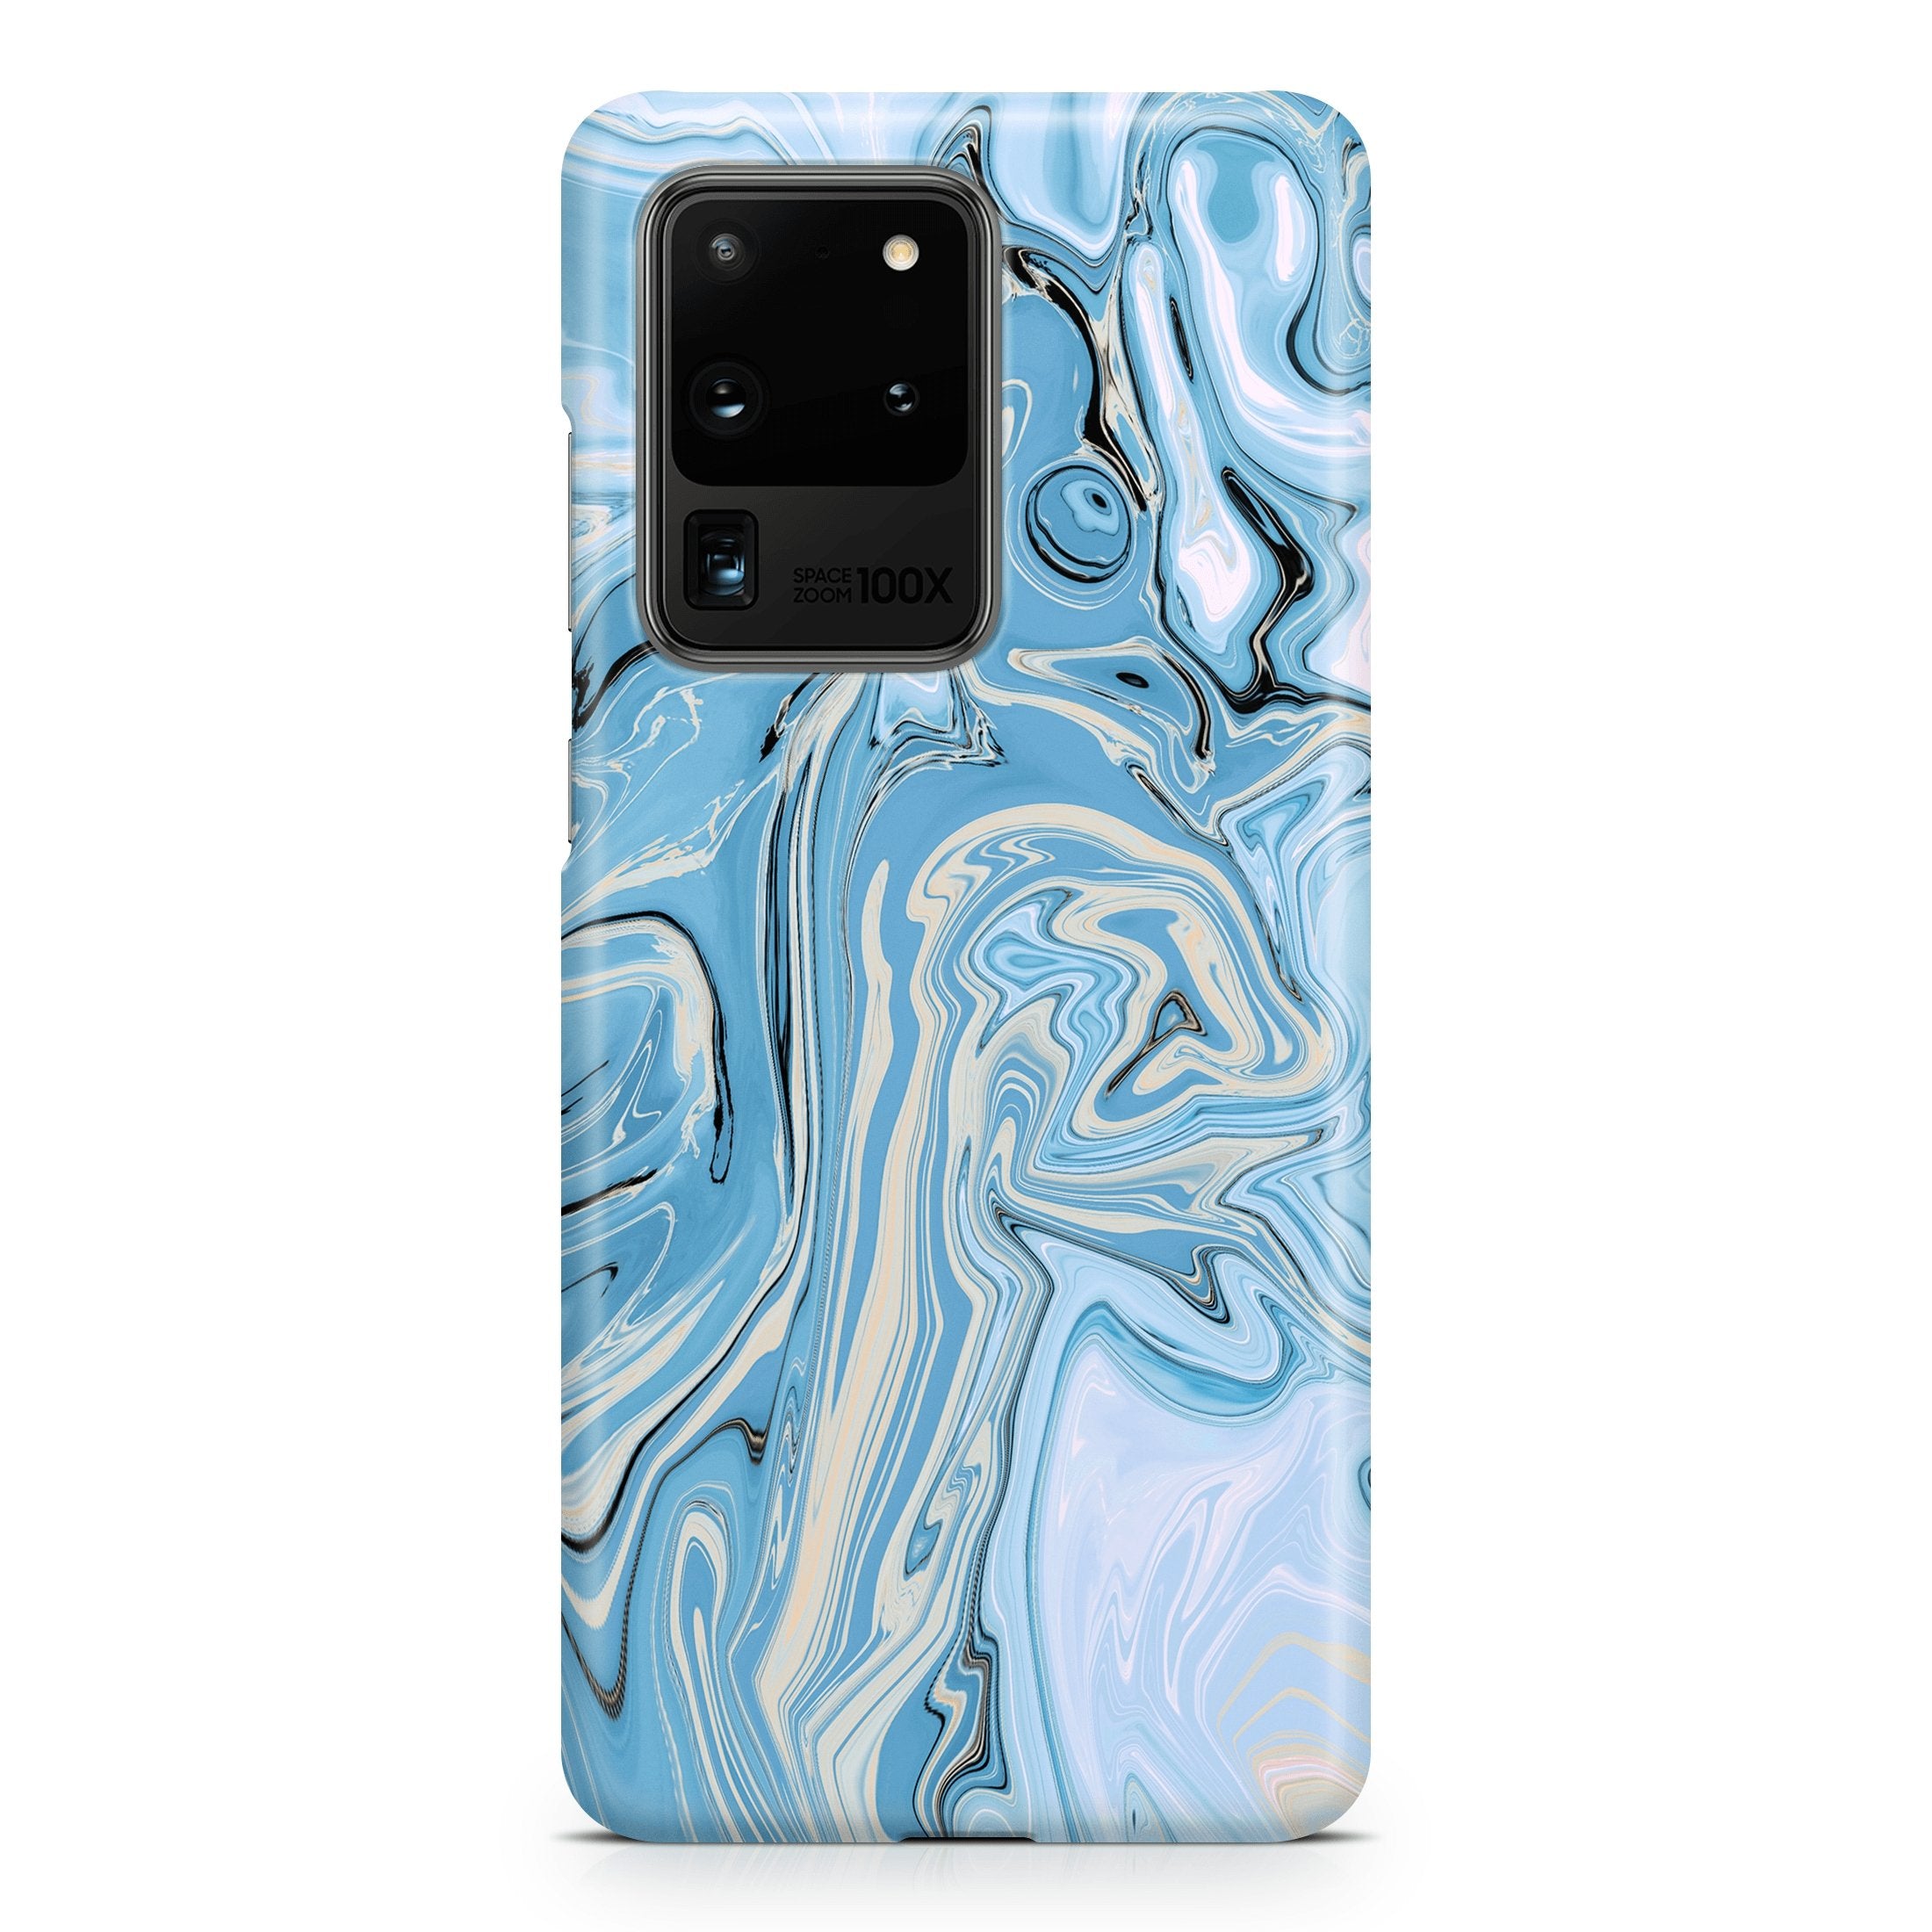 Blue & Creme Agate - Samsung phone case designs by CaseSwagger